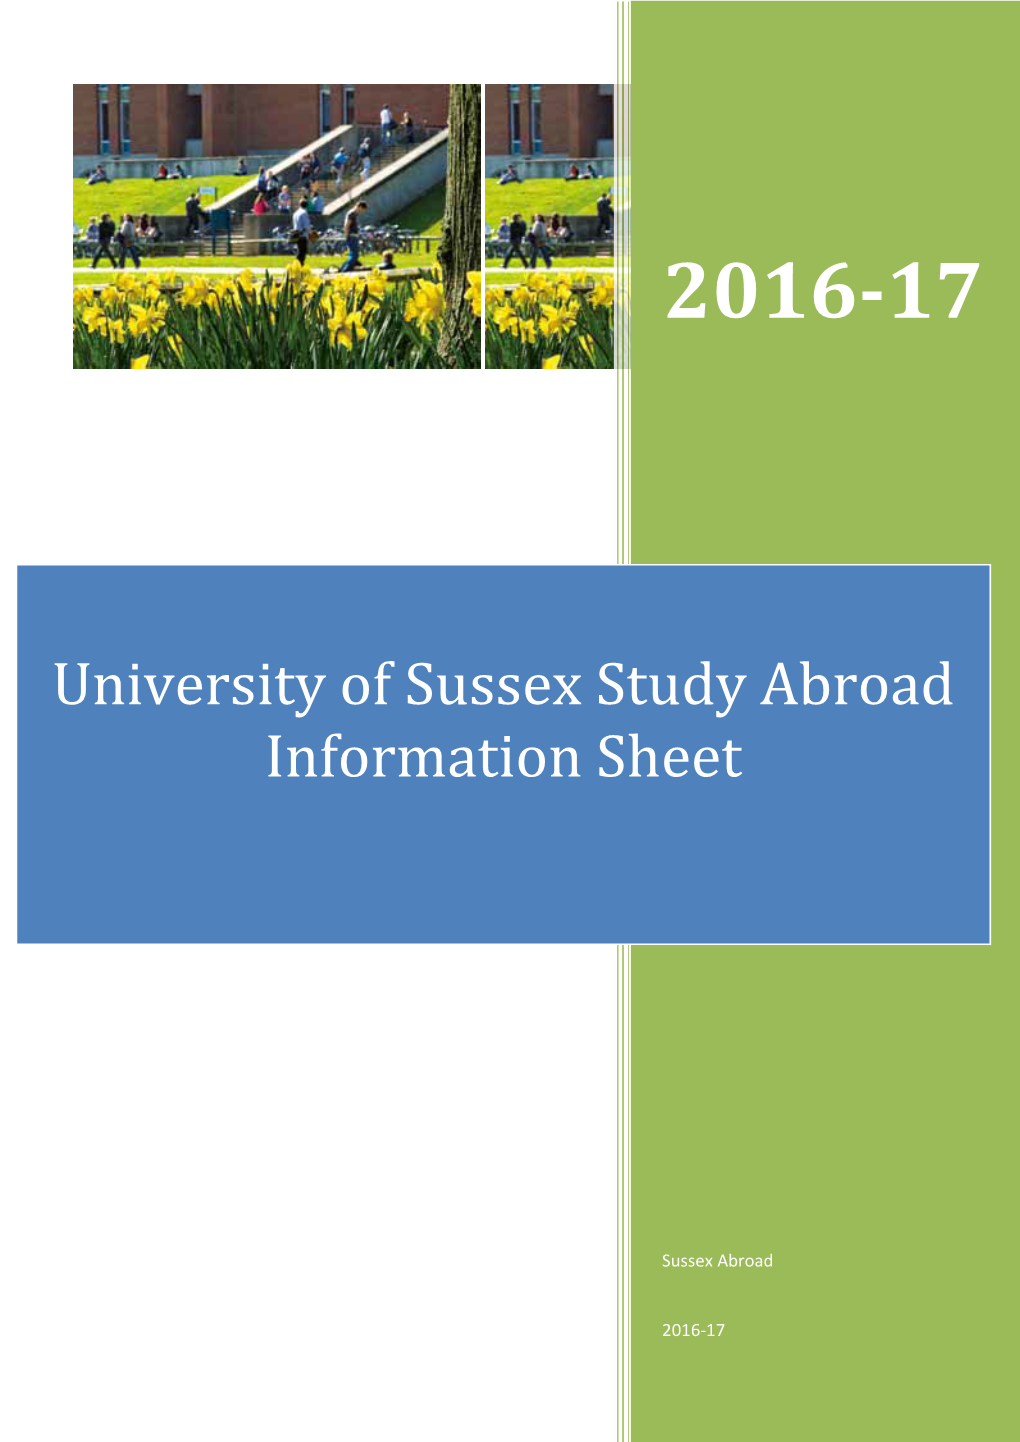 University of Sussex Study Abroad Information Sheet